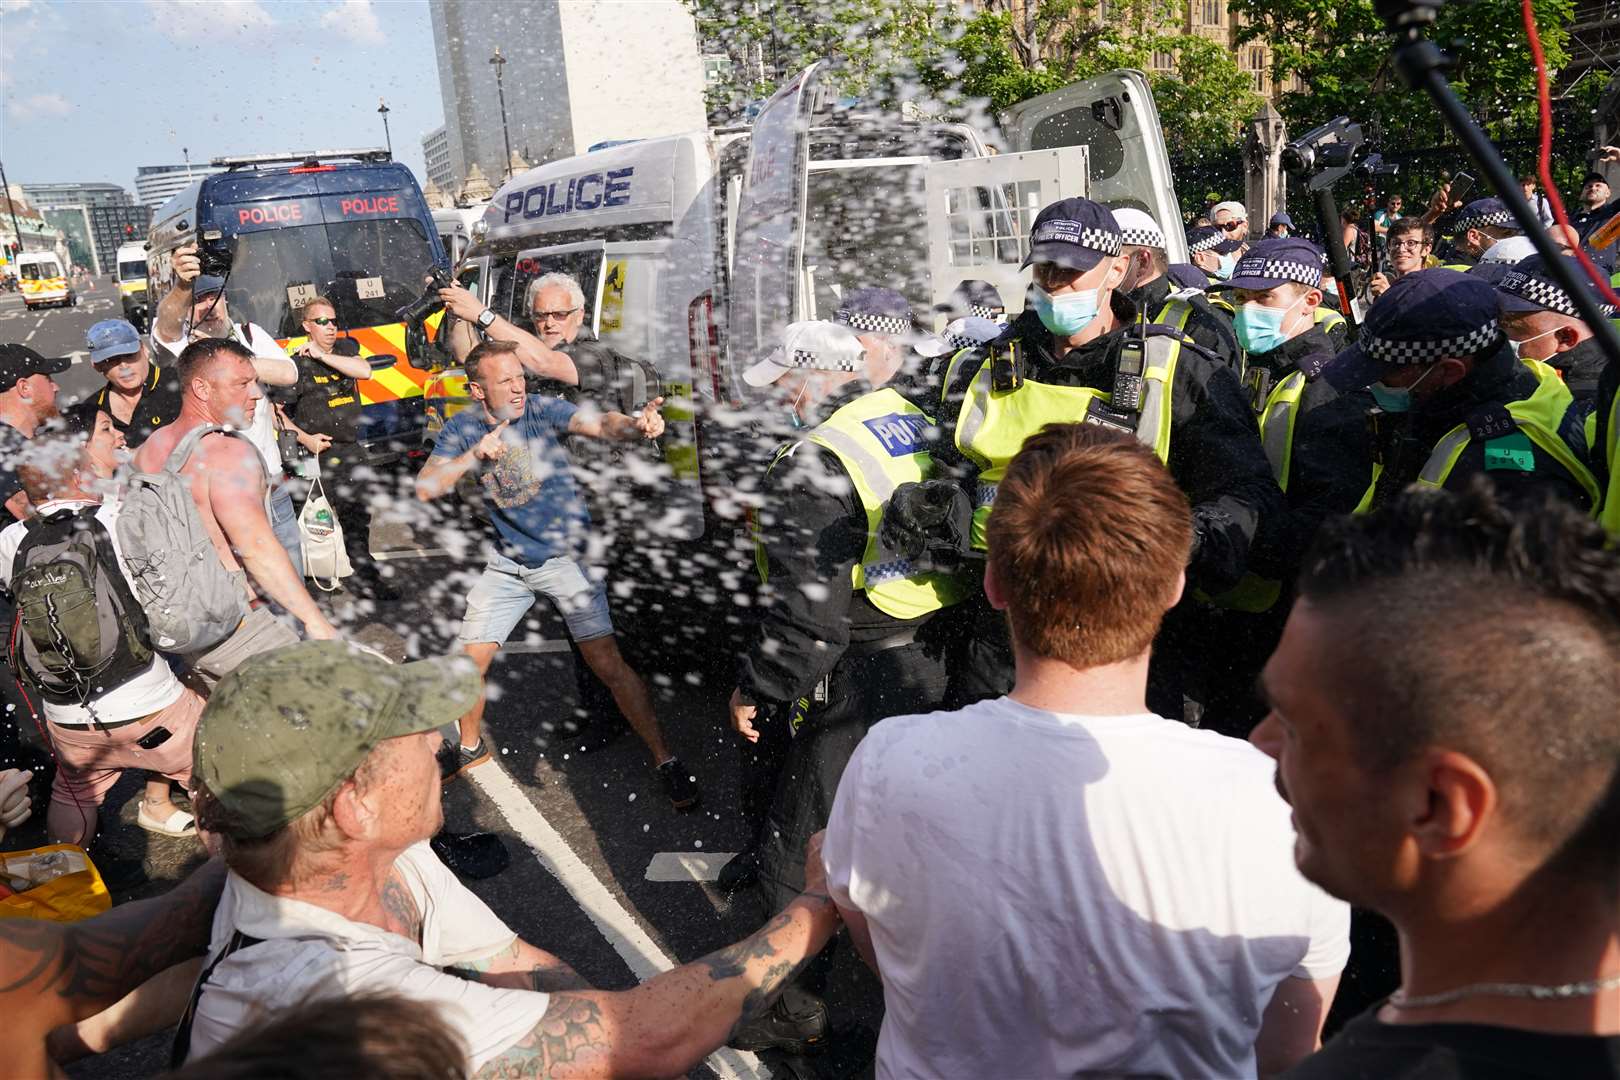 Police and protesters face each other in Parliament Square (Jonathan Brady / PA)